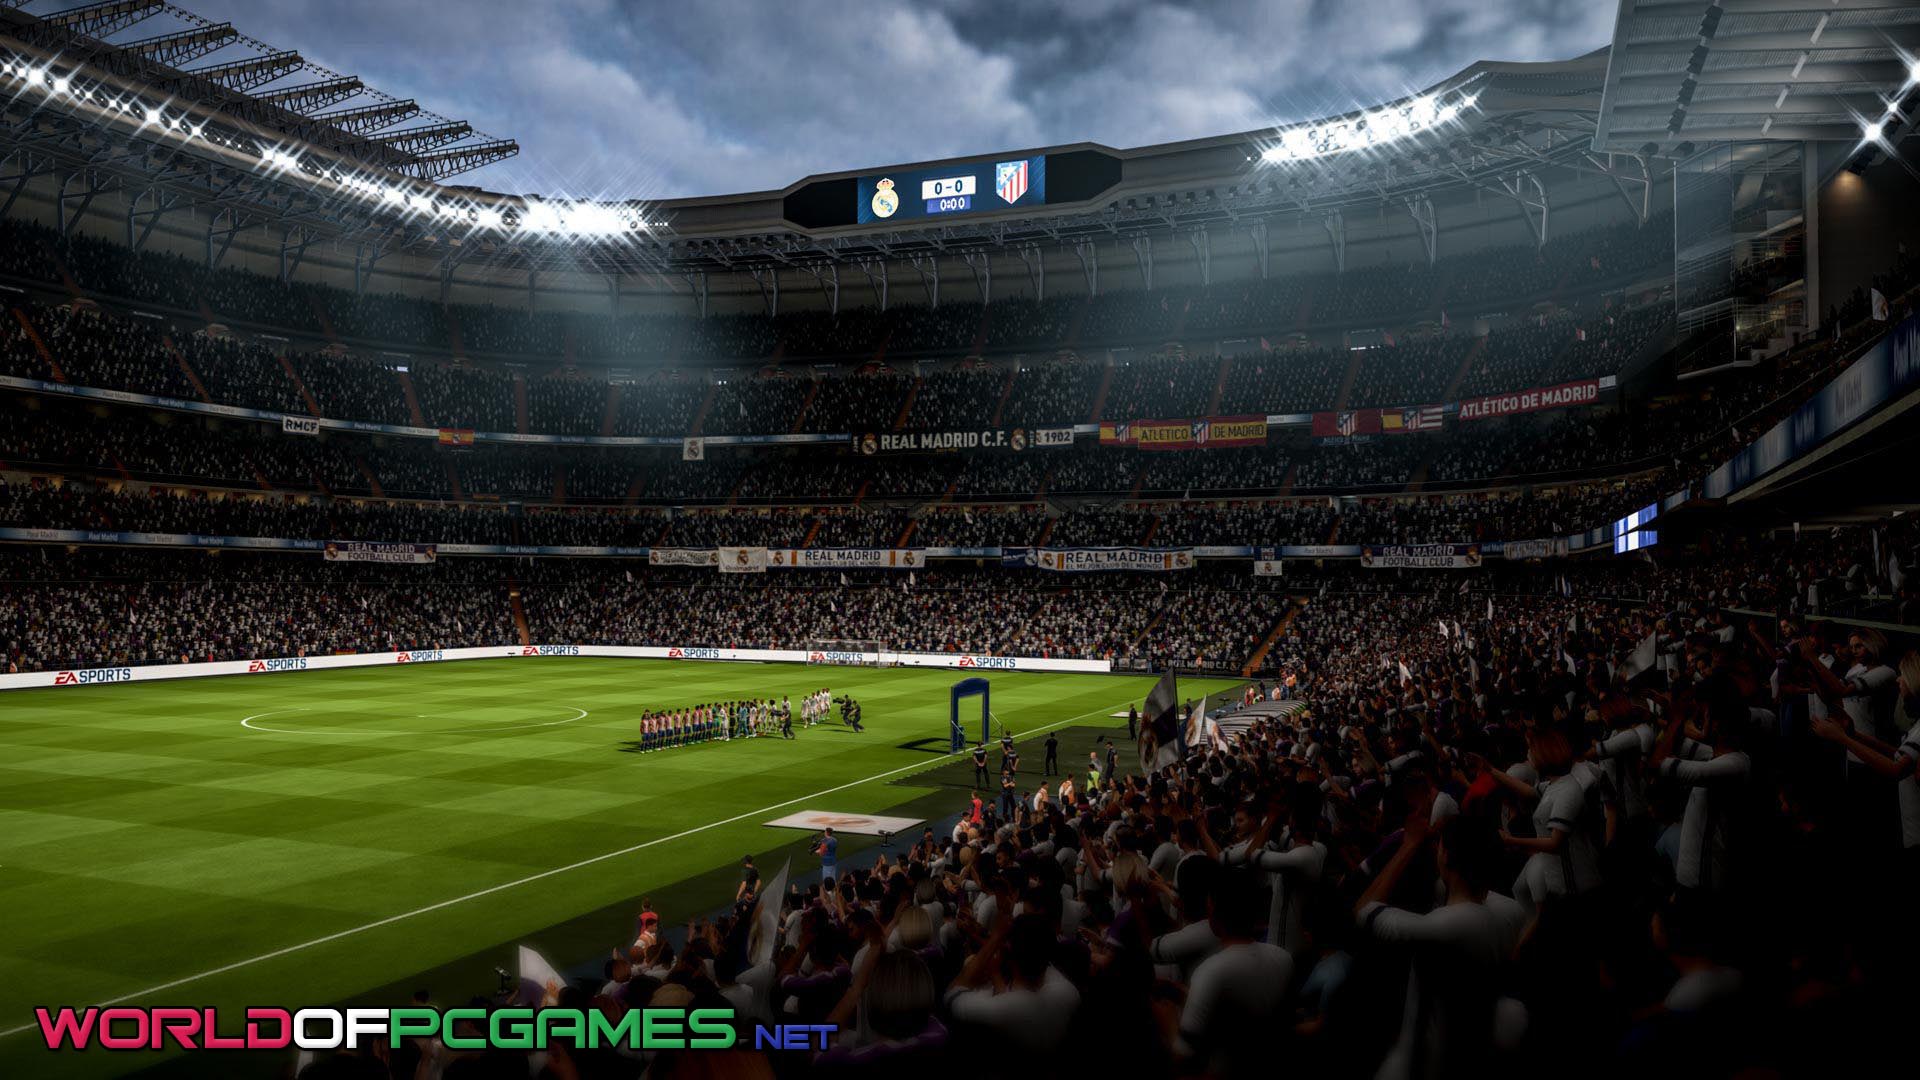 FIFA 18 Free Download By worldof-pcgames.net